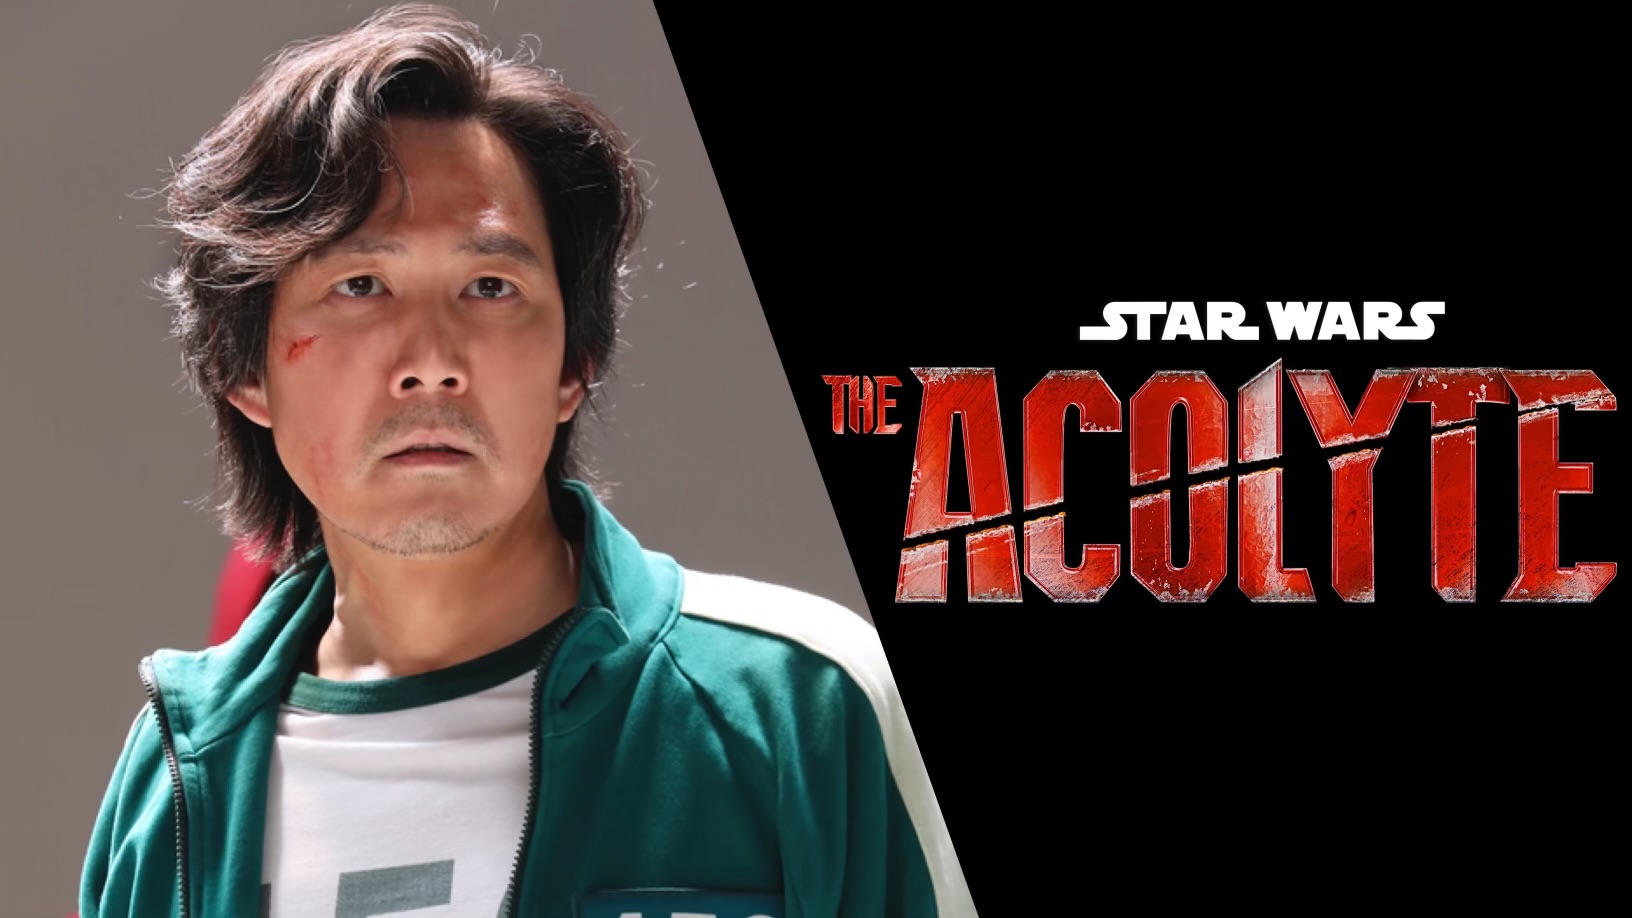 ‘Squid Game’ Star Lee Jung-Jae To Lead Lucasfilm’s ‘The Acolyte’ At Disney+